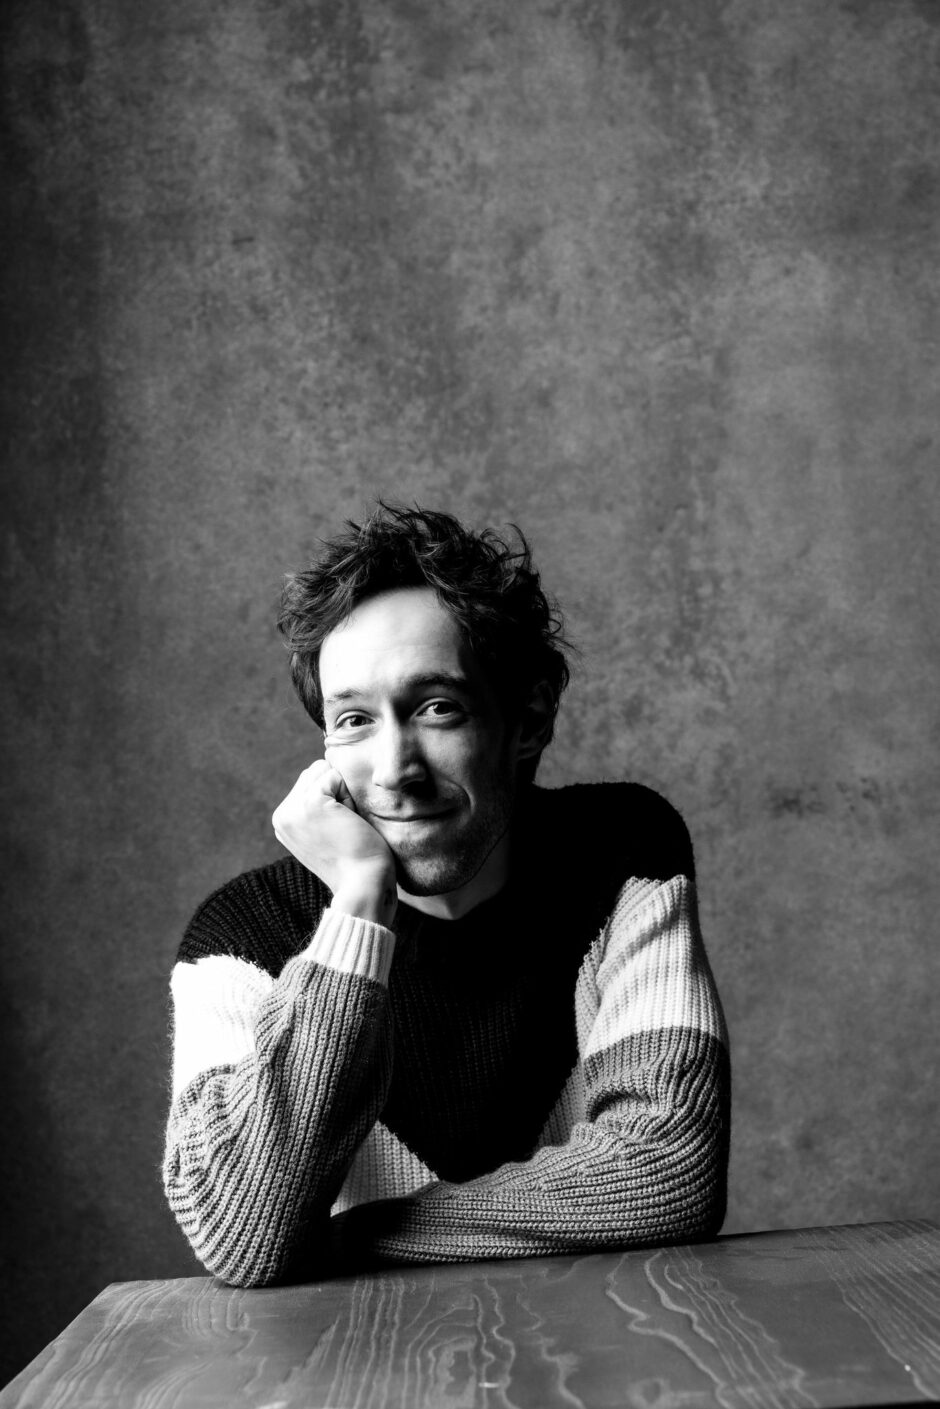 A black and white portrait of Creagen Dow sitting at a wooden table, resting his head on his hand with a slight smile. He is wearing a striped sweater and has tousled hair, creating a casual and relaxed atmosphere against a textured backdrop.